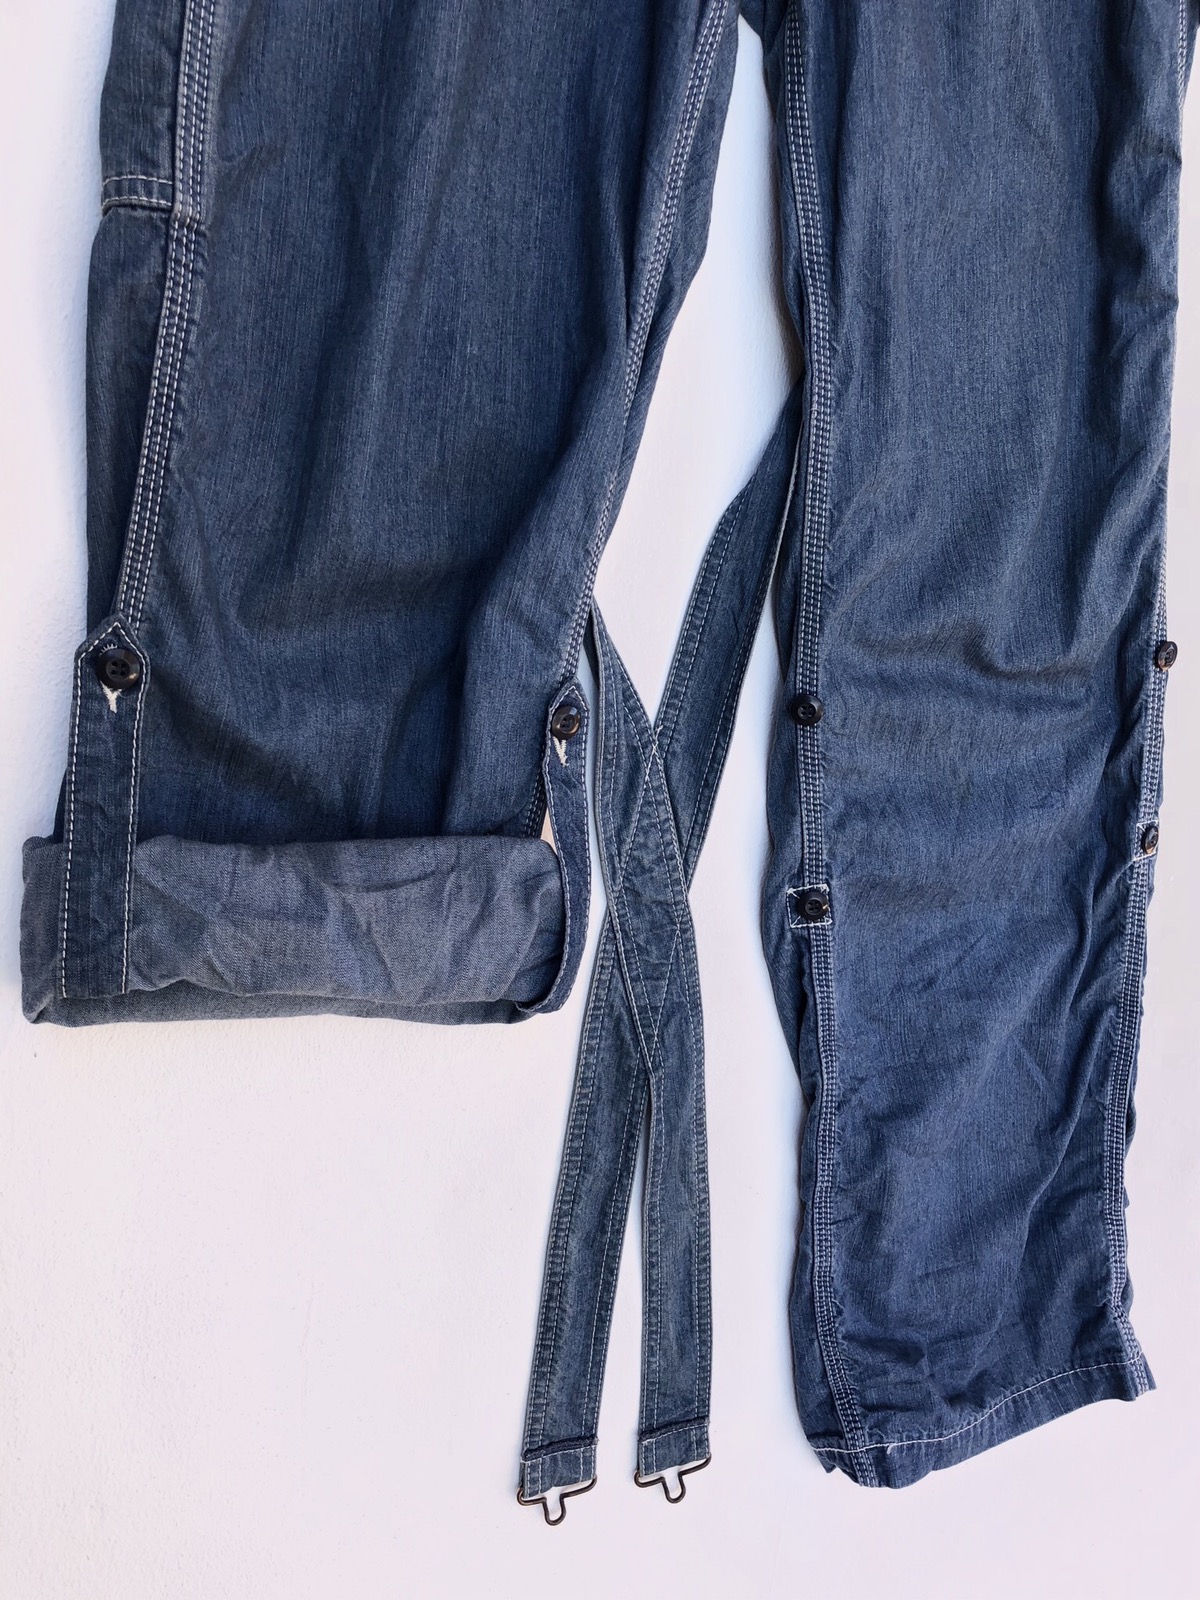 Workers - JAPANESE BRAND RAGEBLUE OVERALL WORKWEAR STYLE - 10